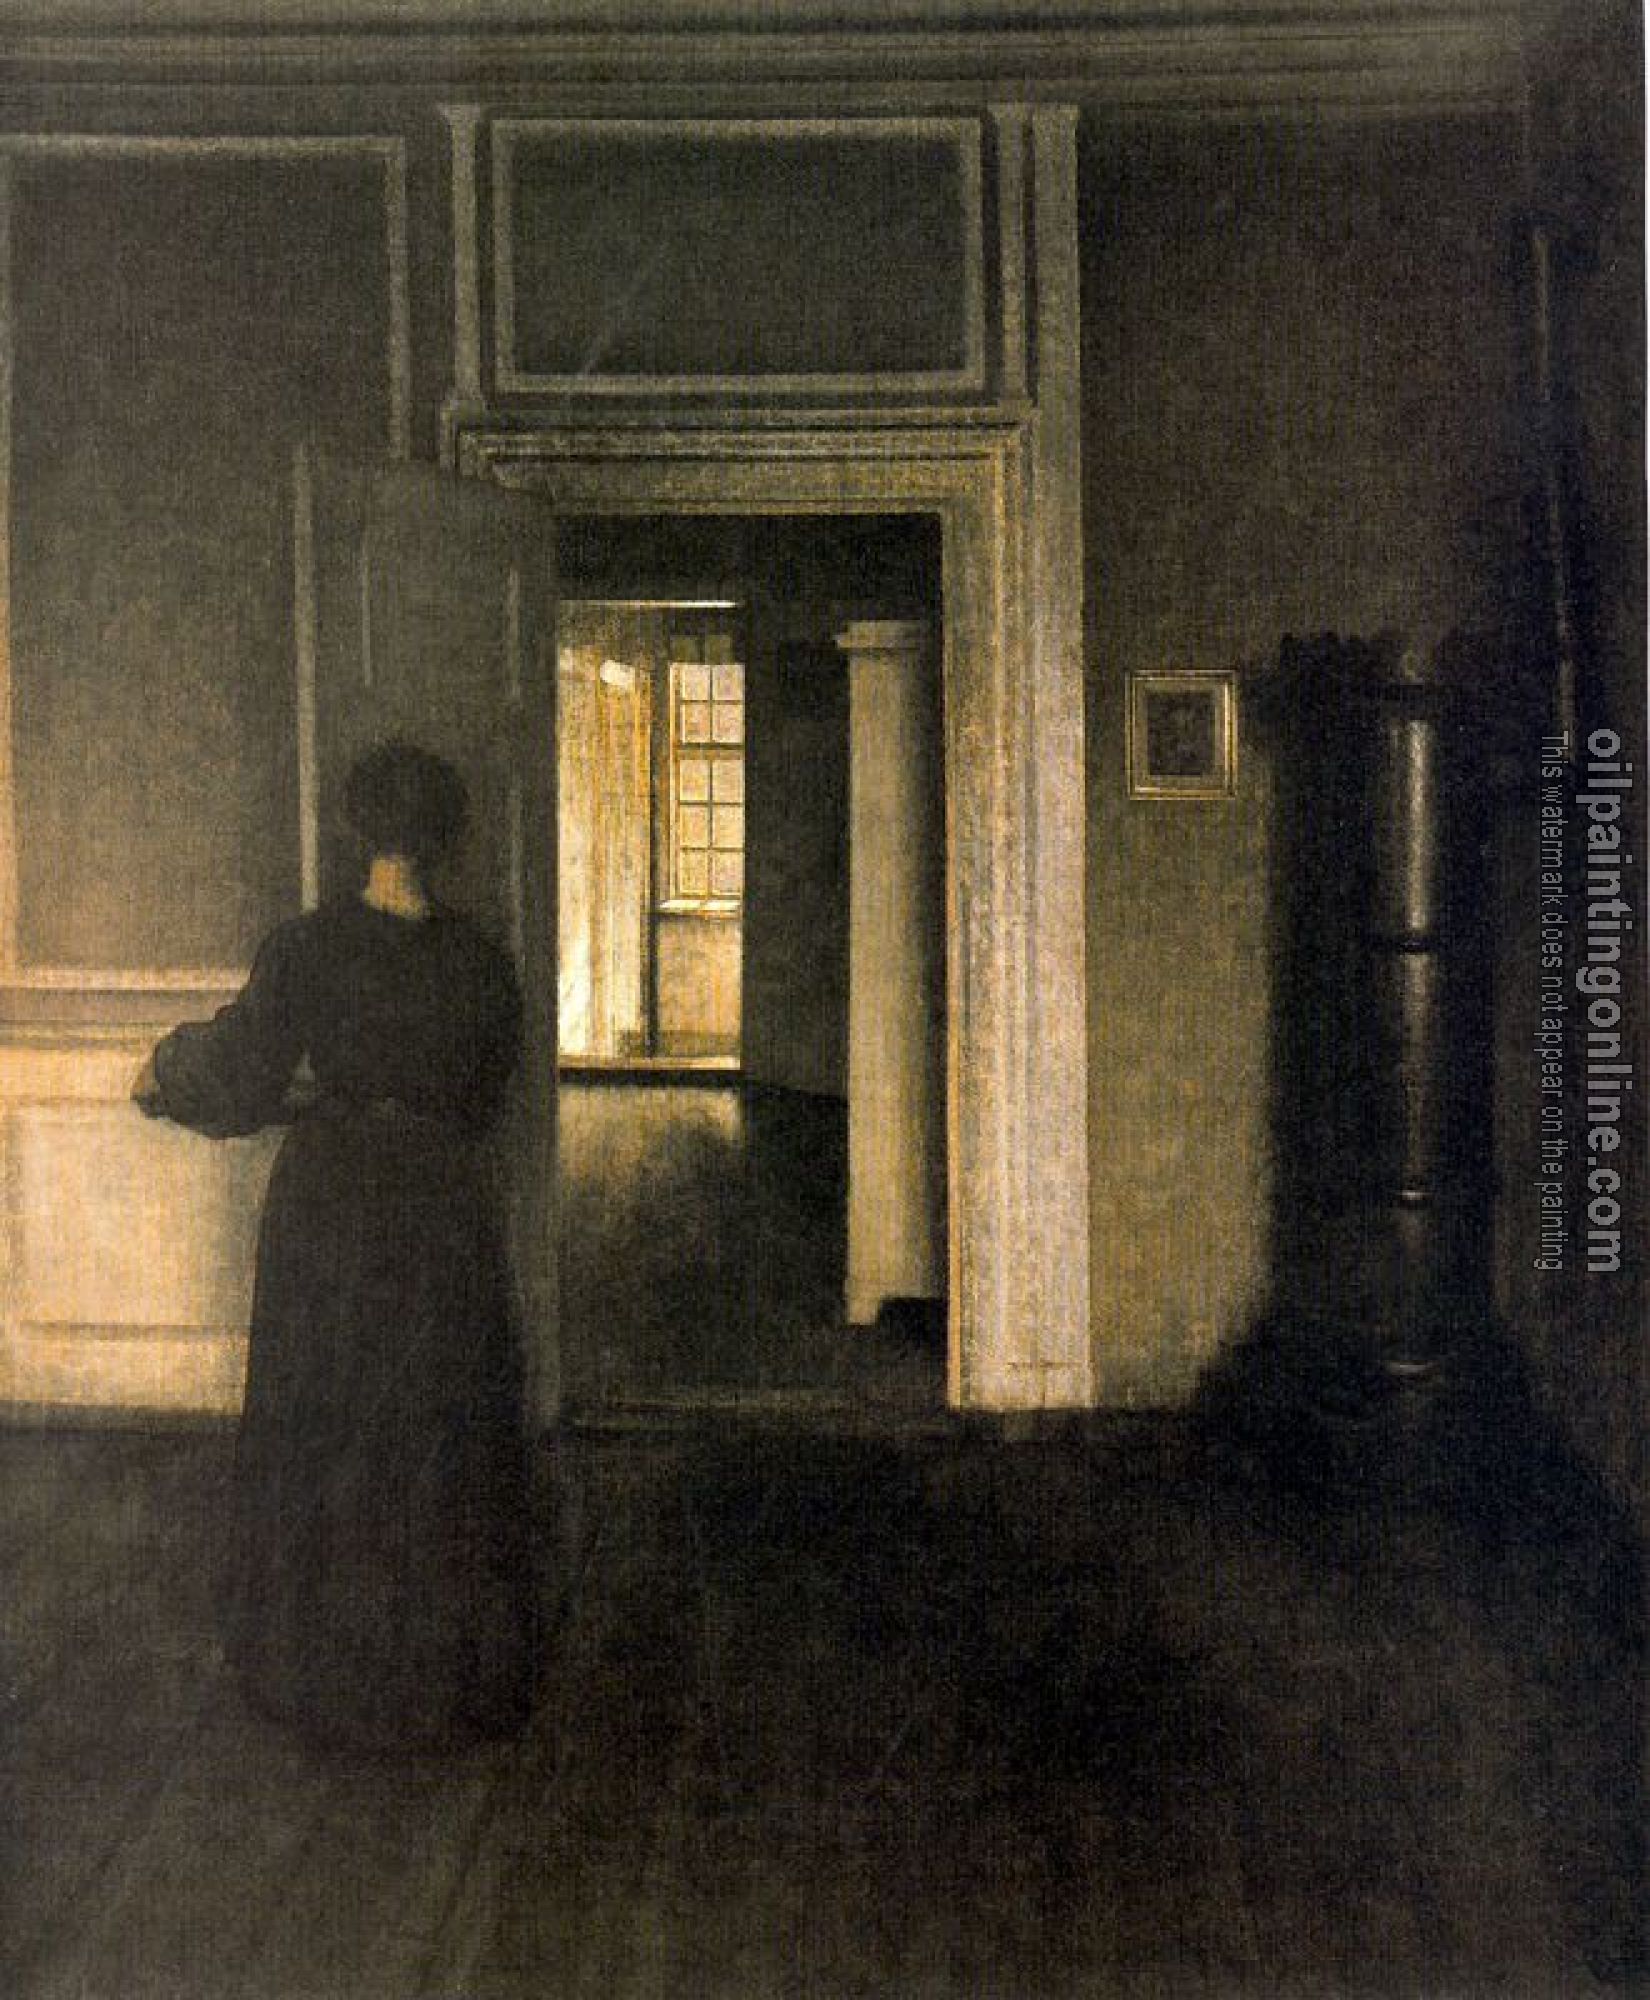 Vilhelm Hammershoi - Interior with an Oven